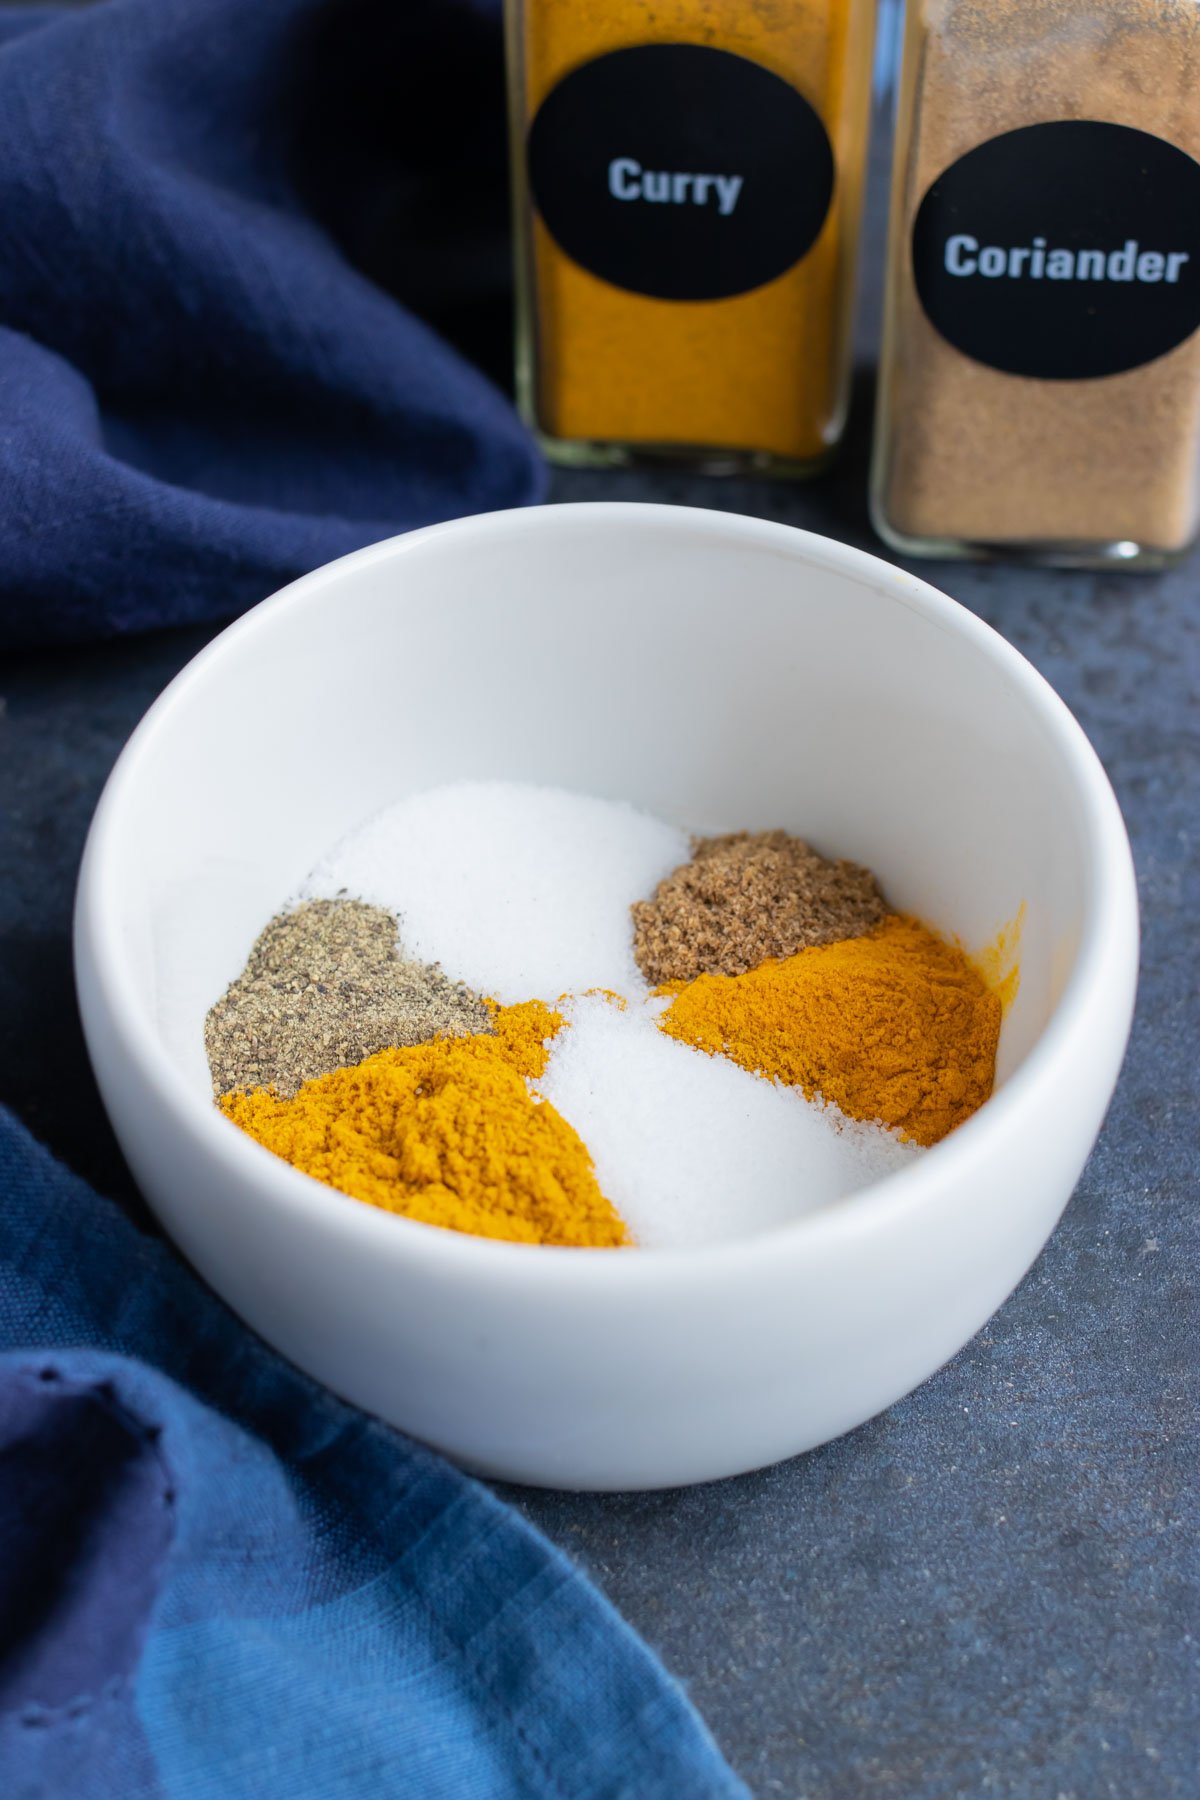 Homemade yellow curry seasoning blend with curry powder and turmeric.